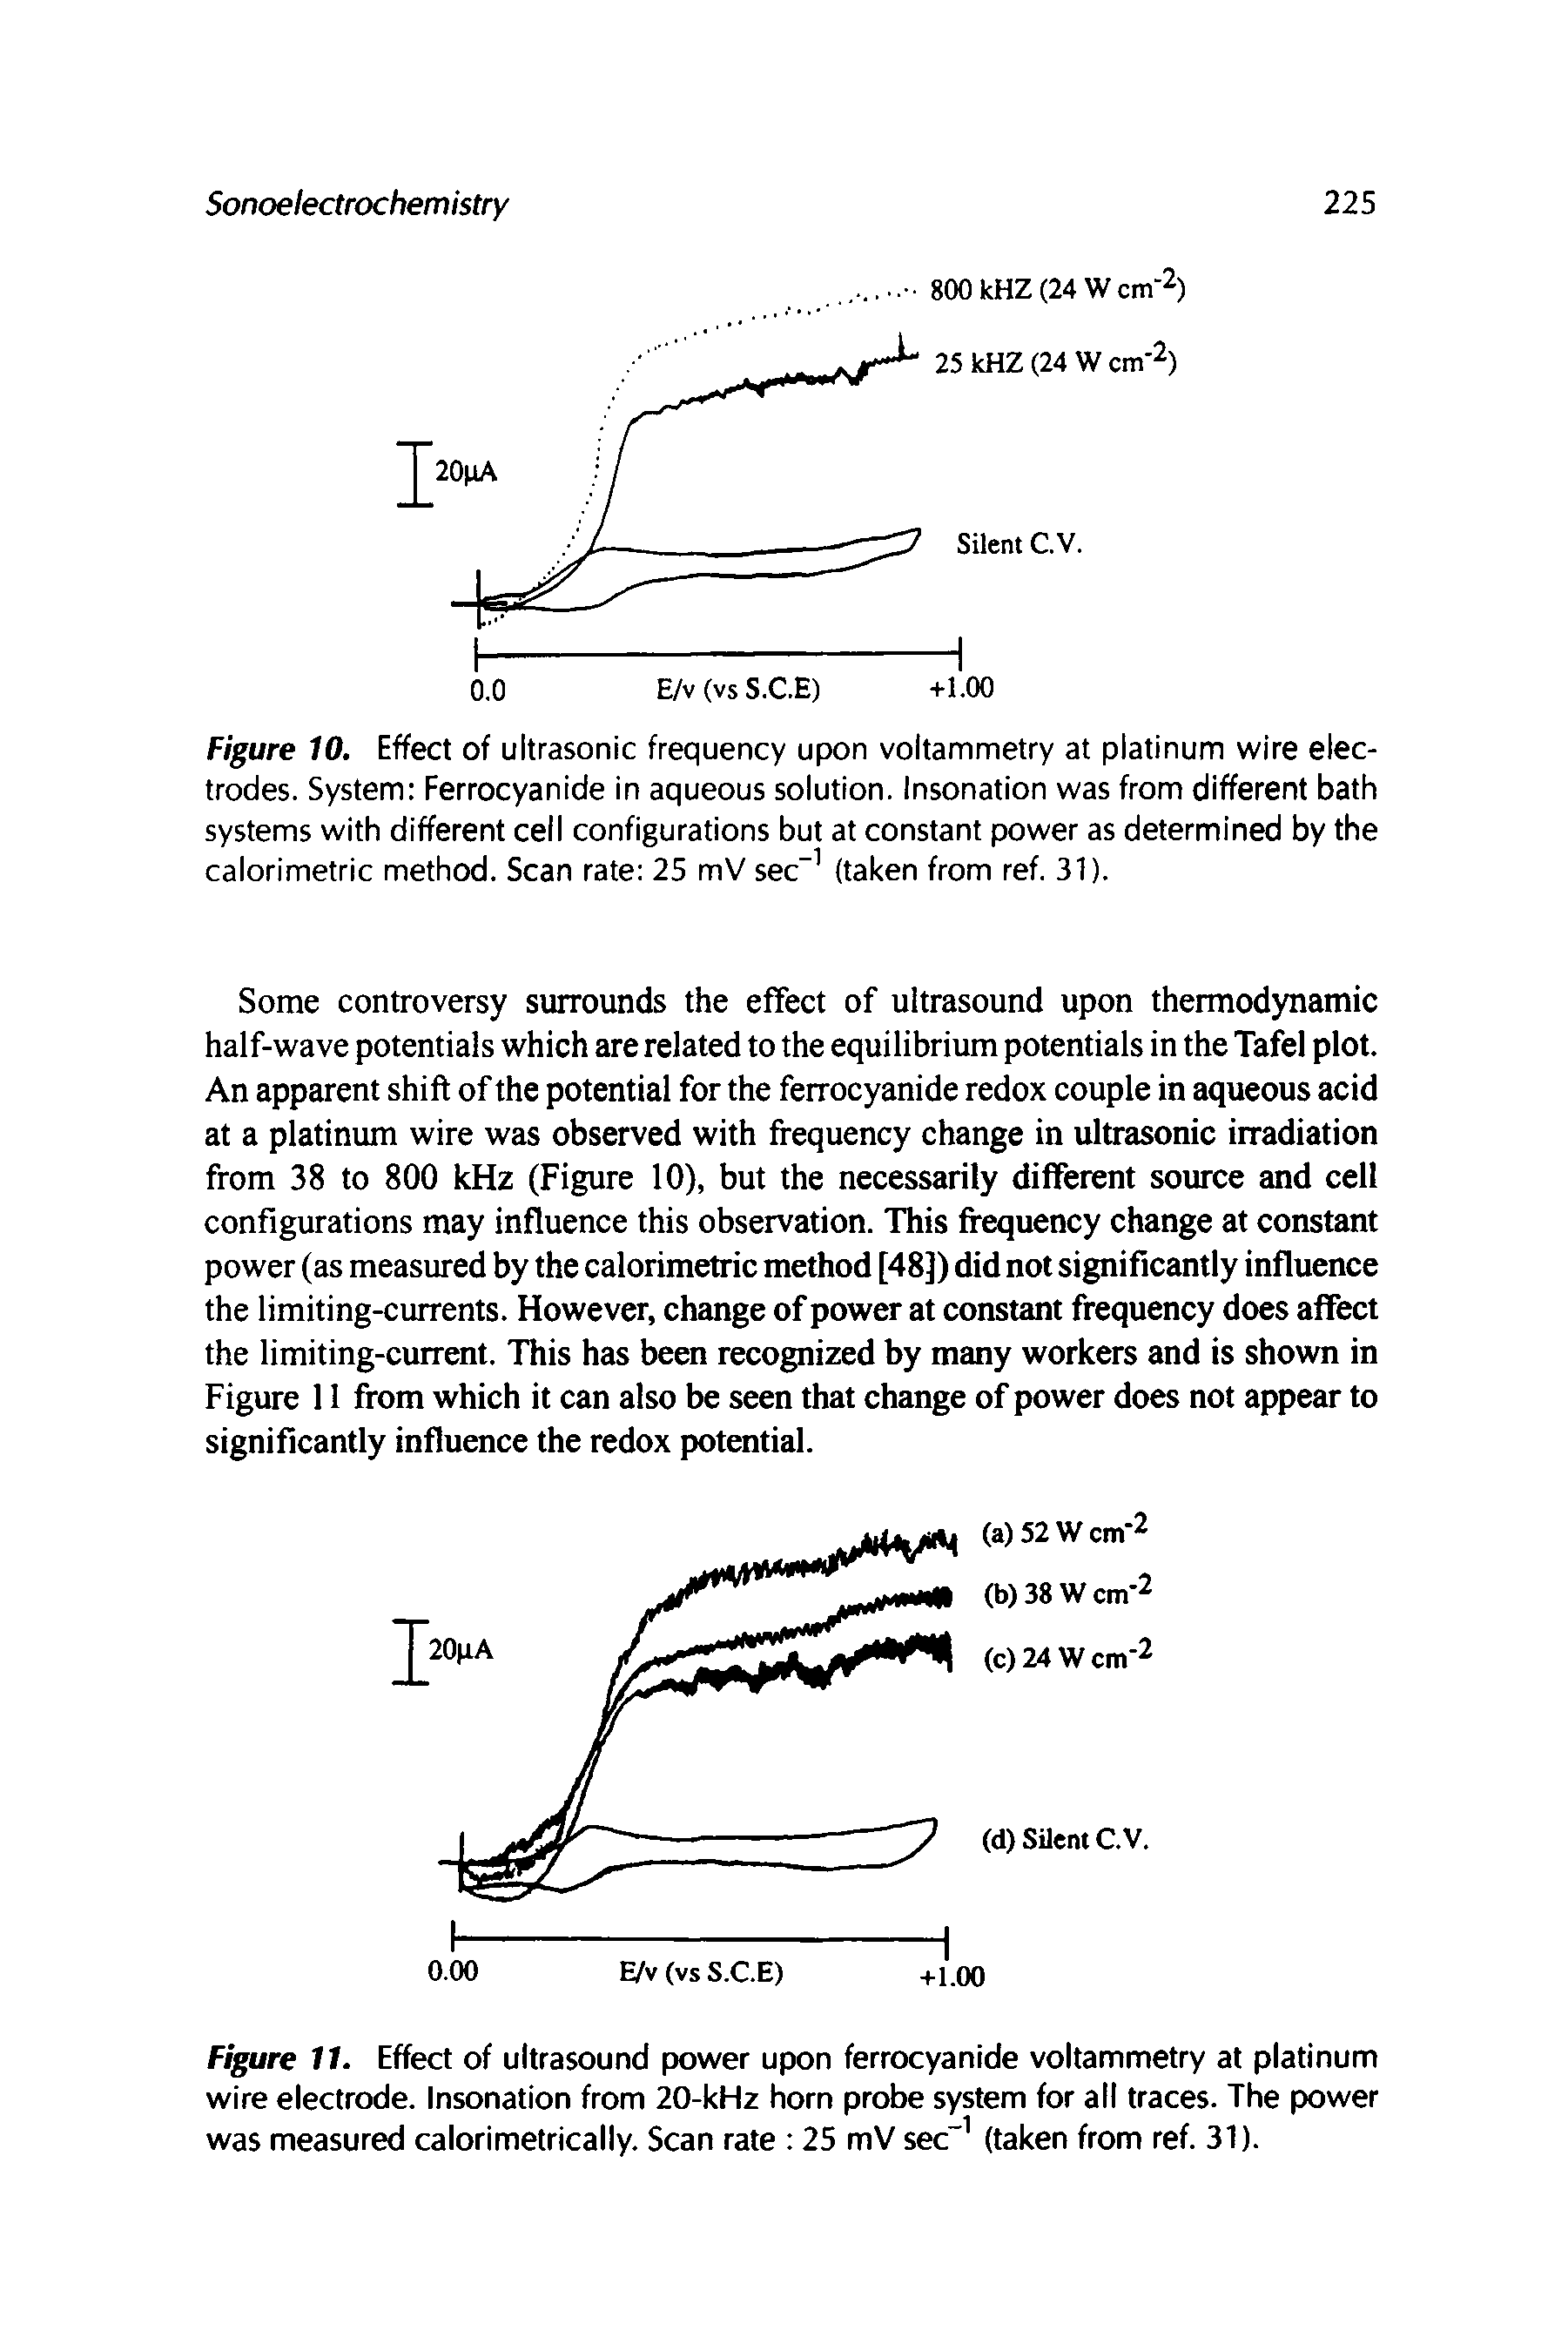 Figure 11. Effect of ultrasound power upon ferrocyanide voltammetry at platinum wire electrode. Insonation from 20-kHz horn probe system for all traces. The power was measured calorimetrically. Scan rate 25 mV sec-1 (taken from ref. 31).